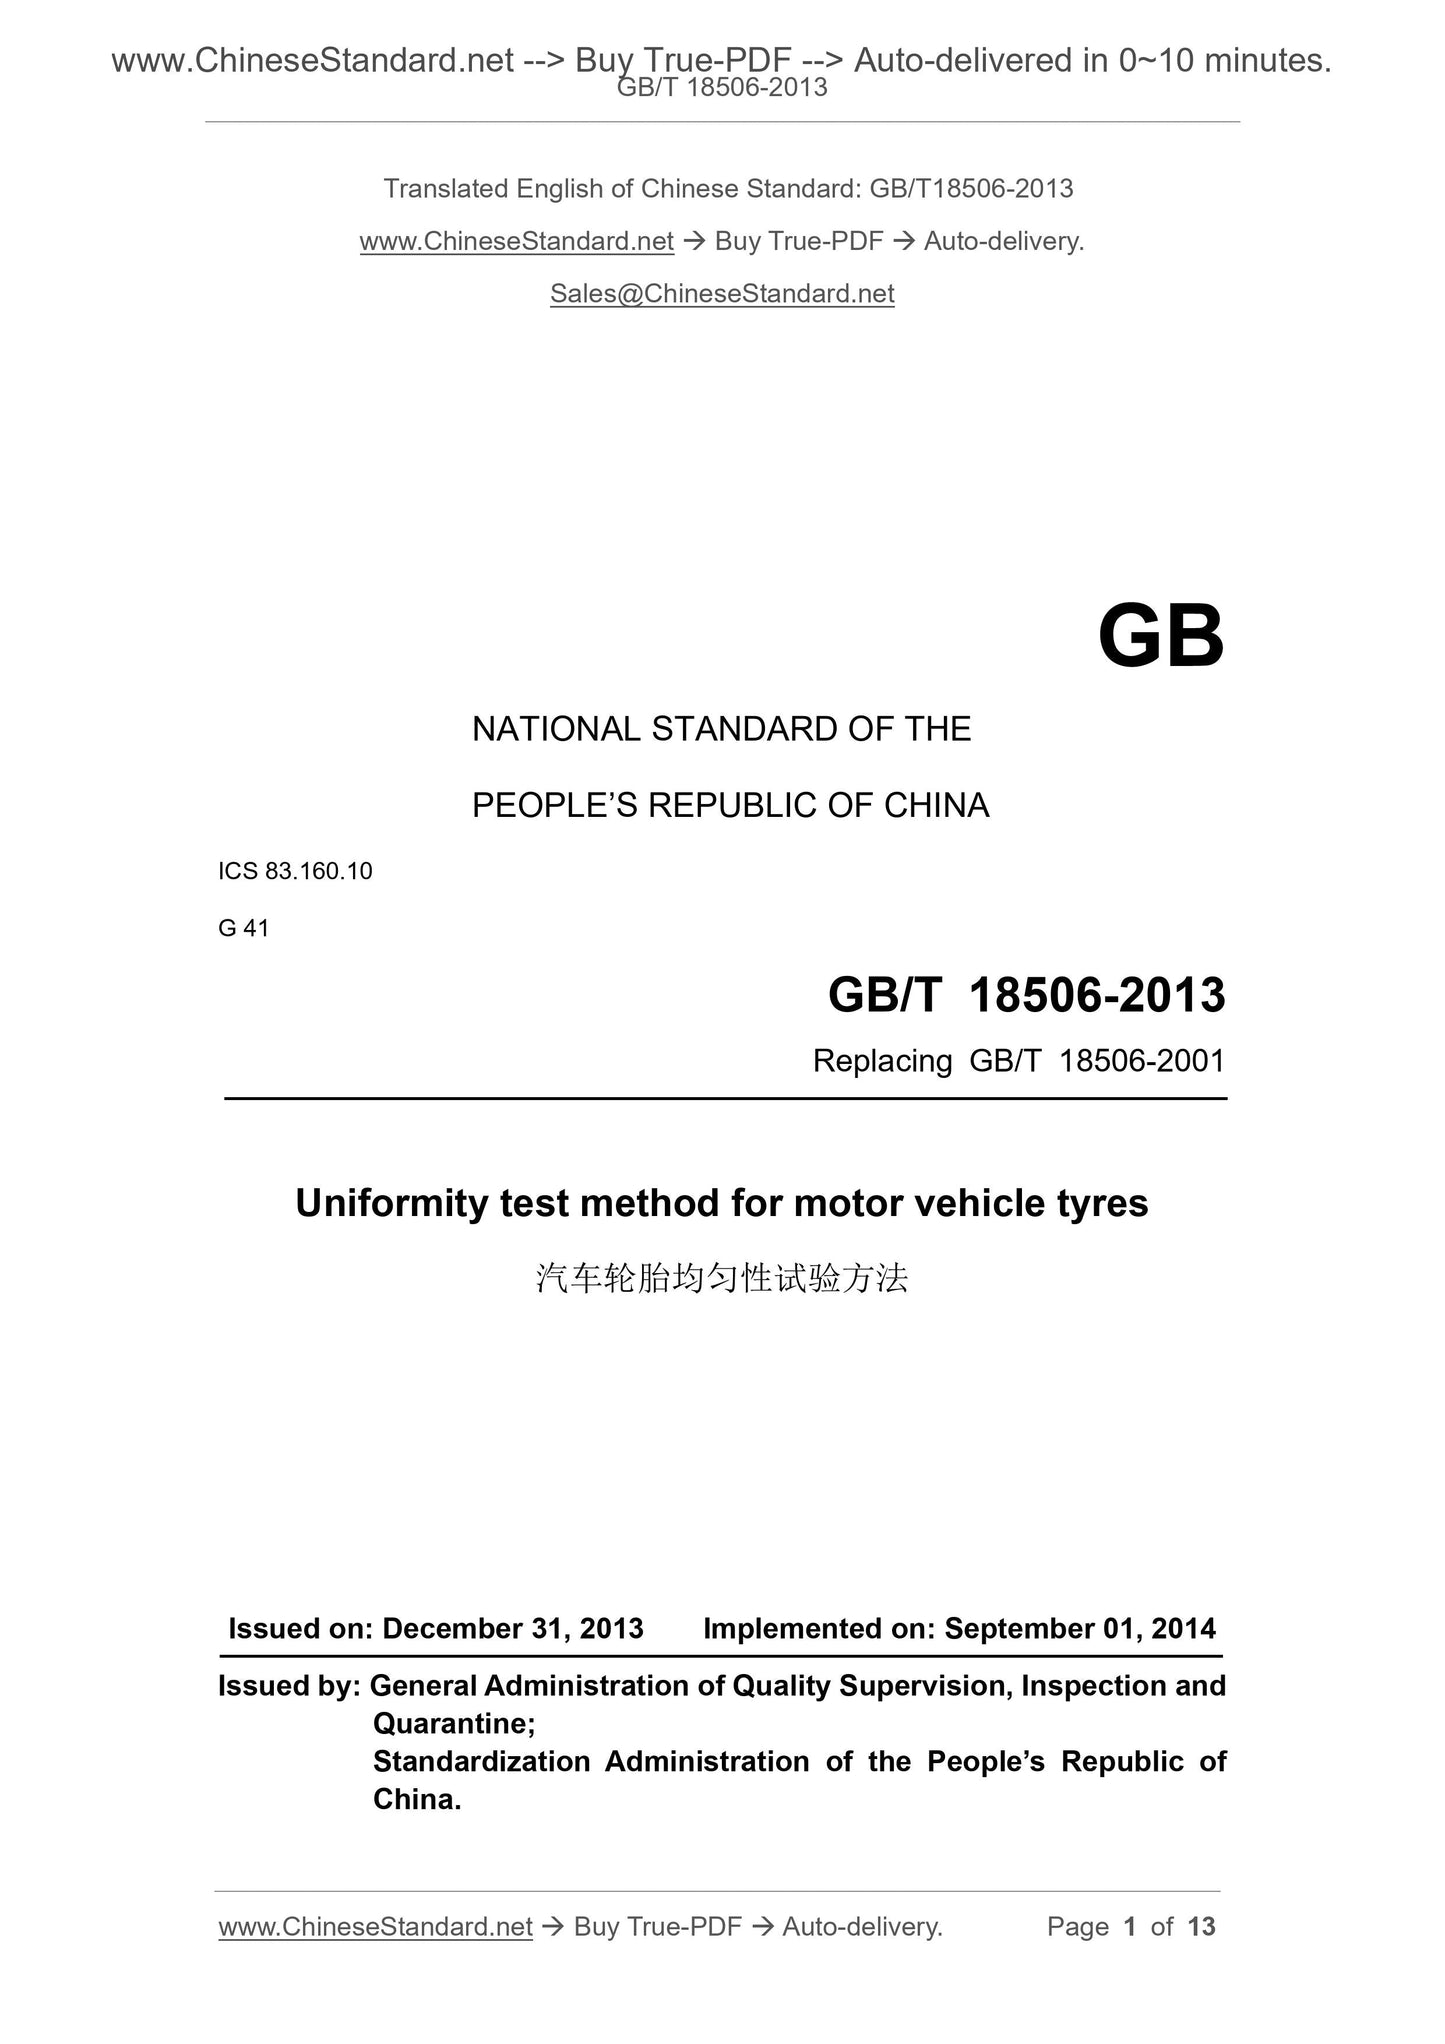 GB/T 18506-2013 Page 1